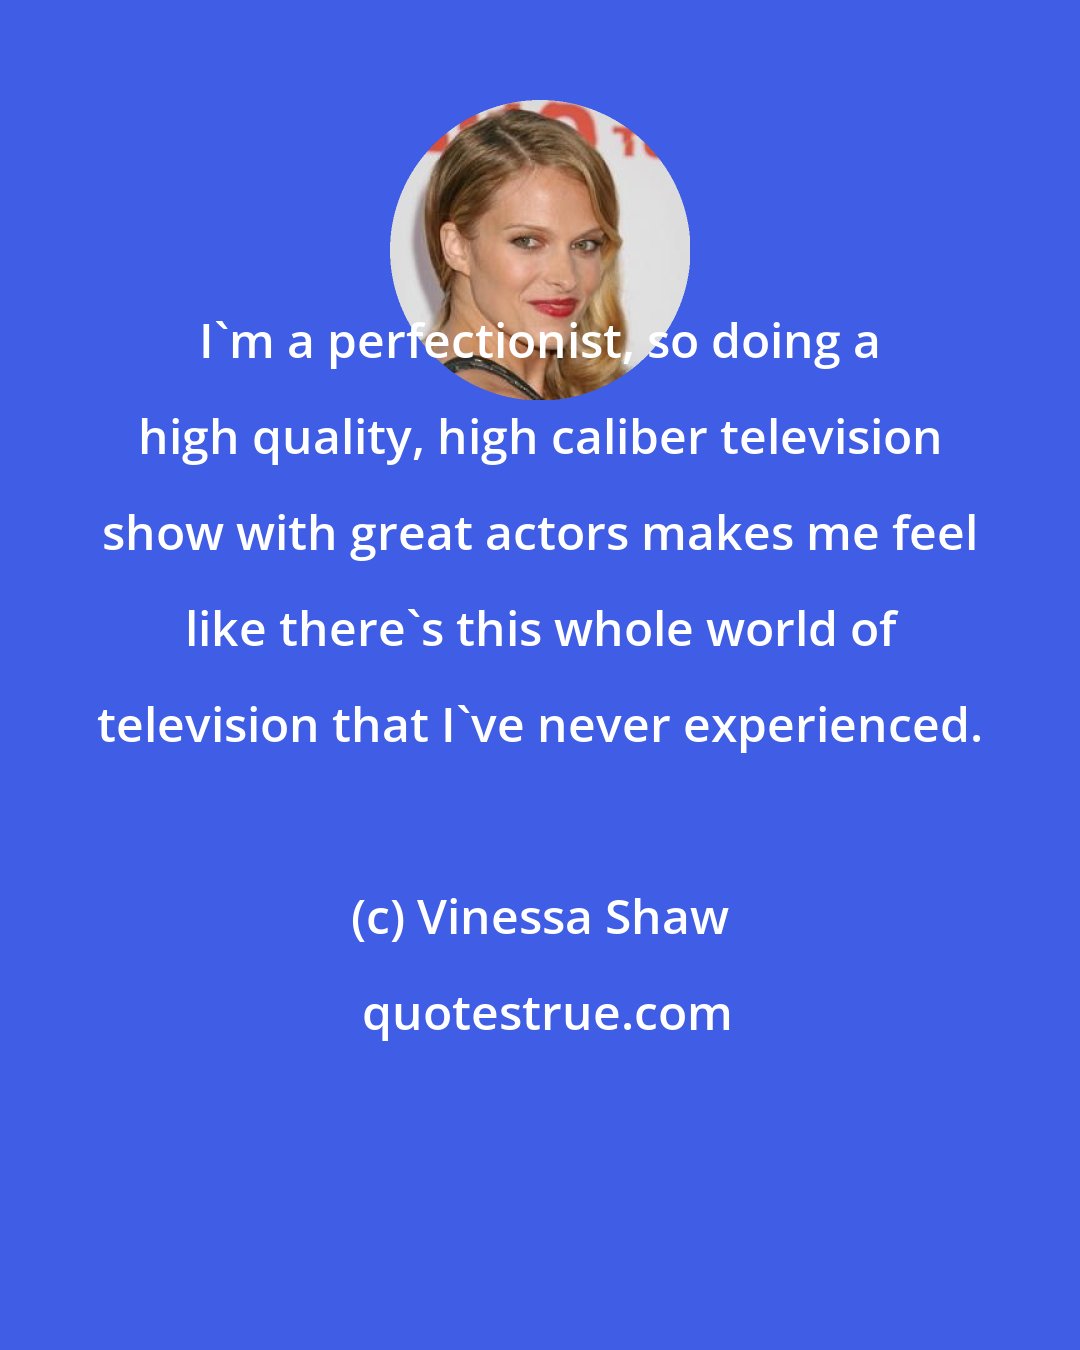 Vinessa Shaw: I'm a perfectionist, so doing a high quality, high caliber television show with great actors makes me feel like there's this whole world of television that I've never experienced.